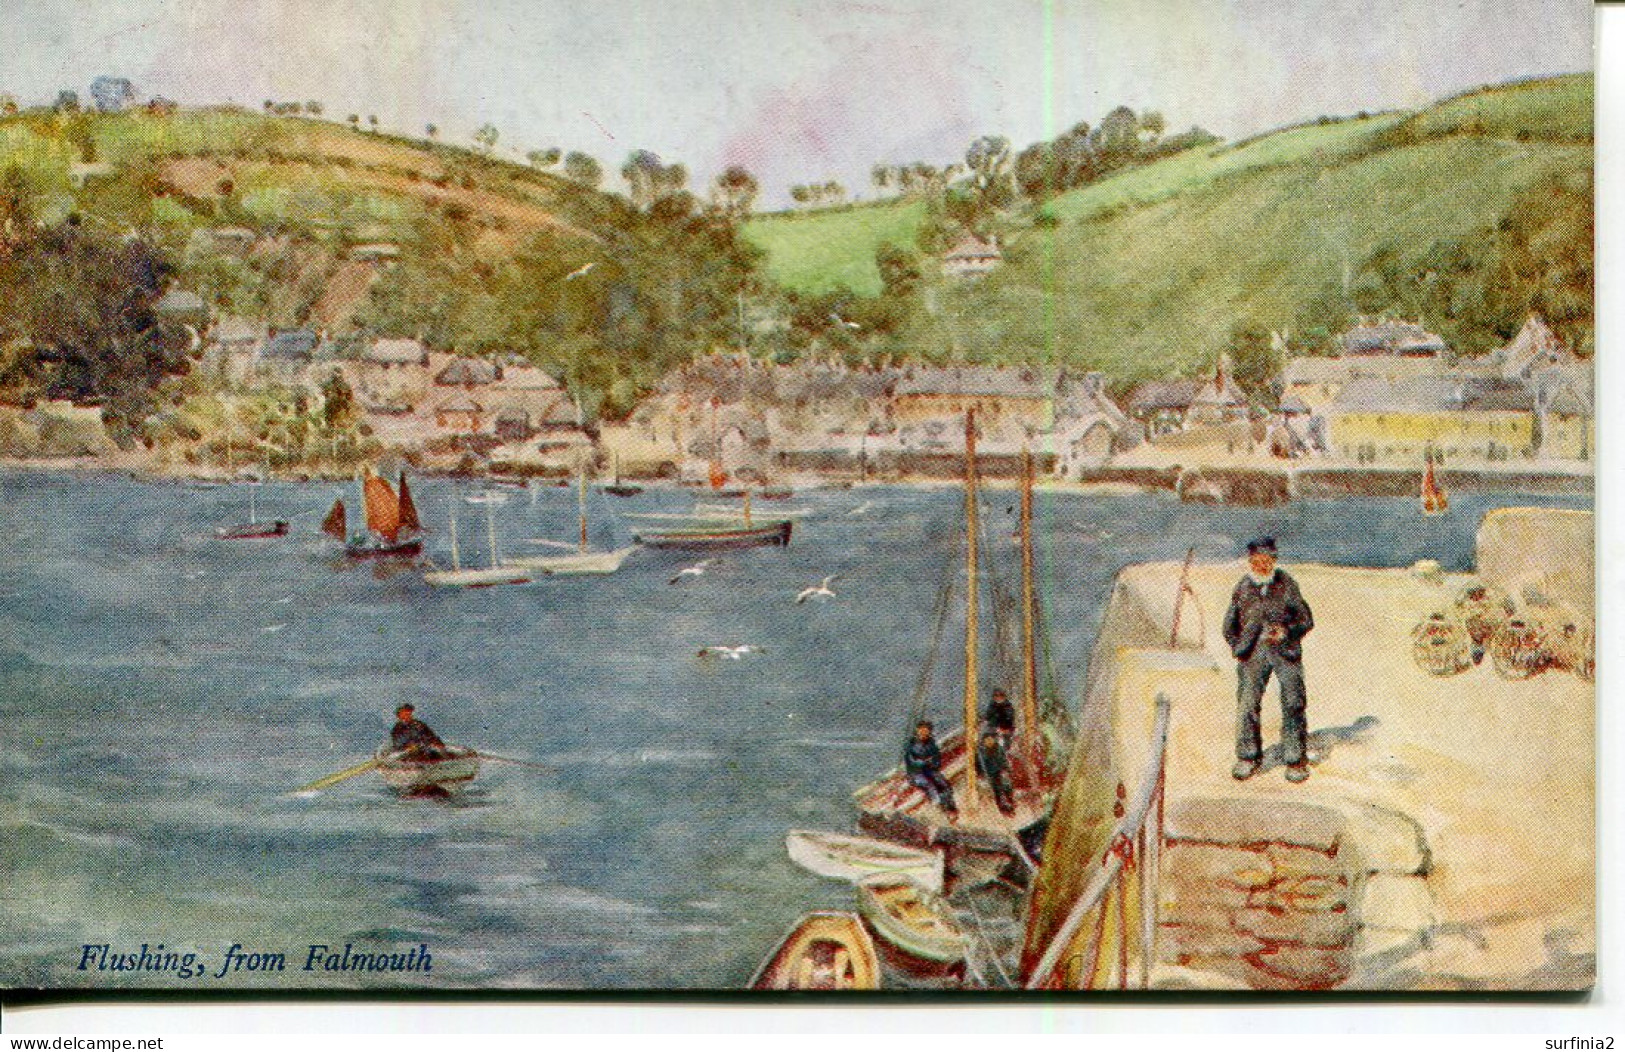 MISCELLANEOUS ART - FLUSHING FROM FALMOUTH By G F NICHOLLS Art560 - Falmouth